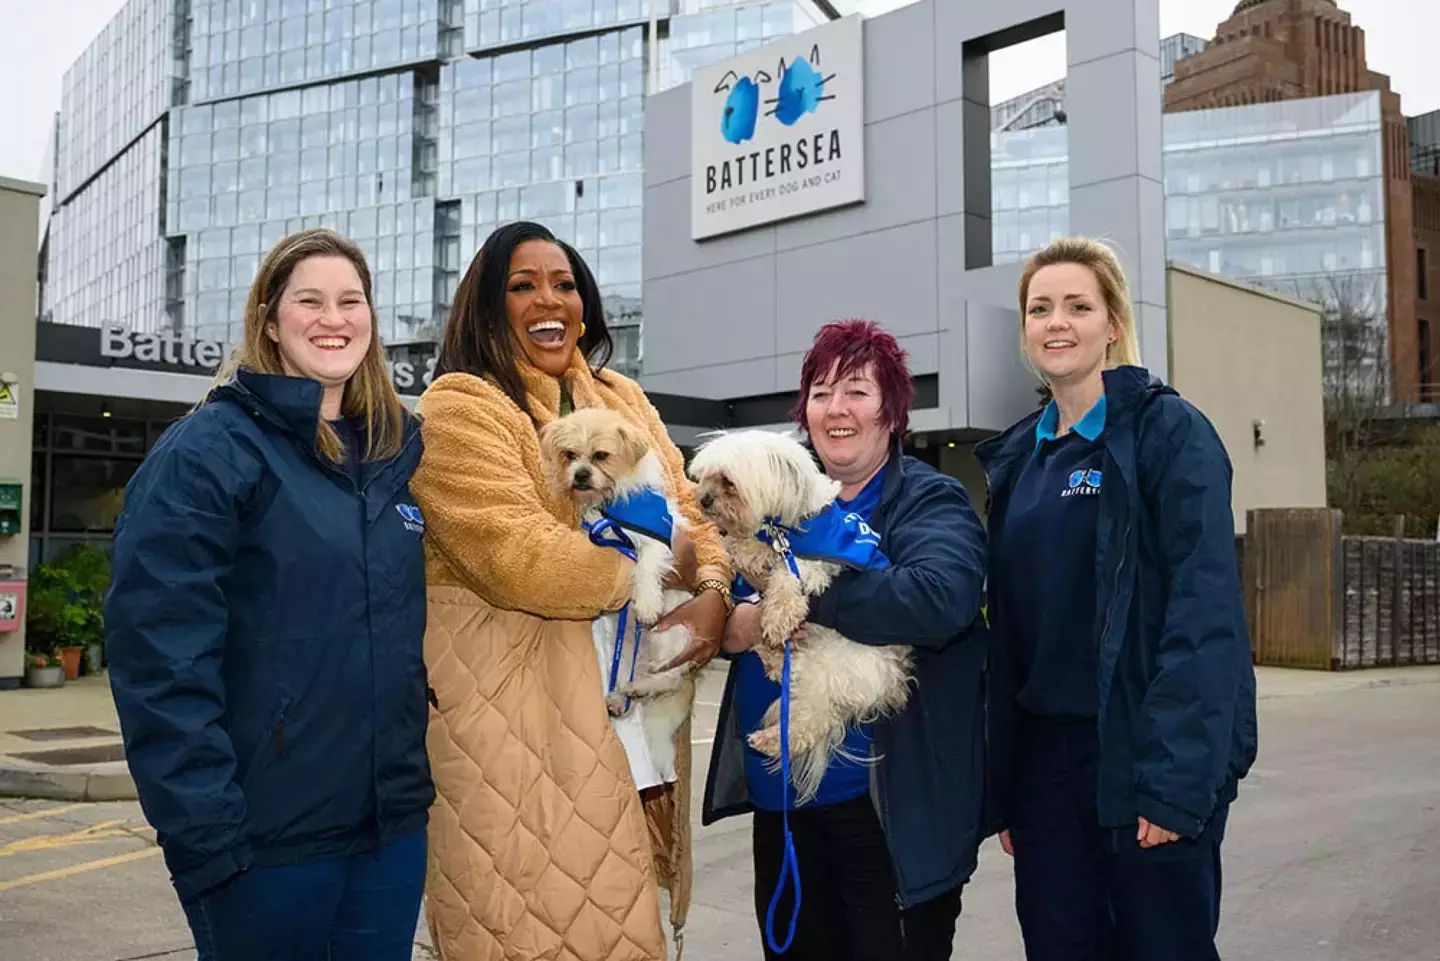 Alison Hammond has made her For the Love of Dogs debut. (ITV)